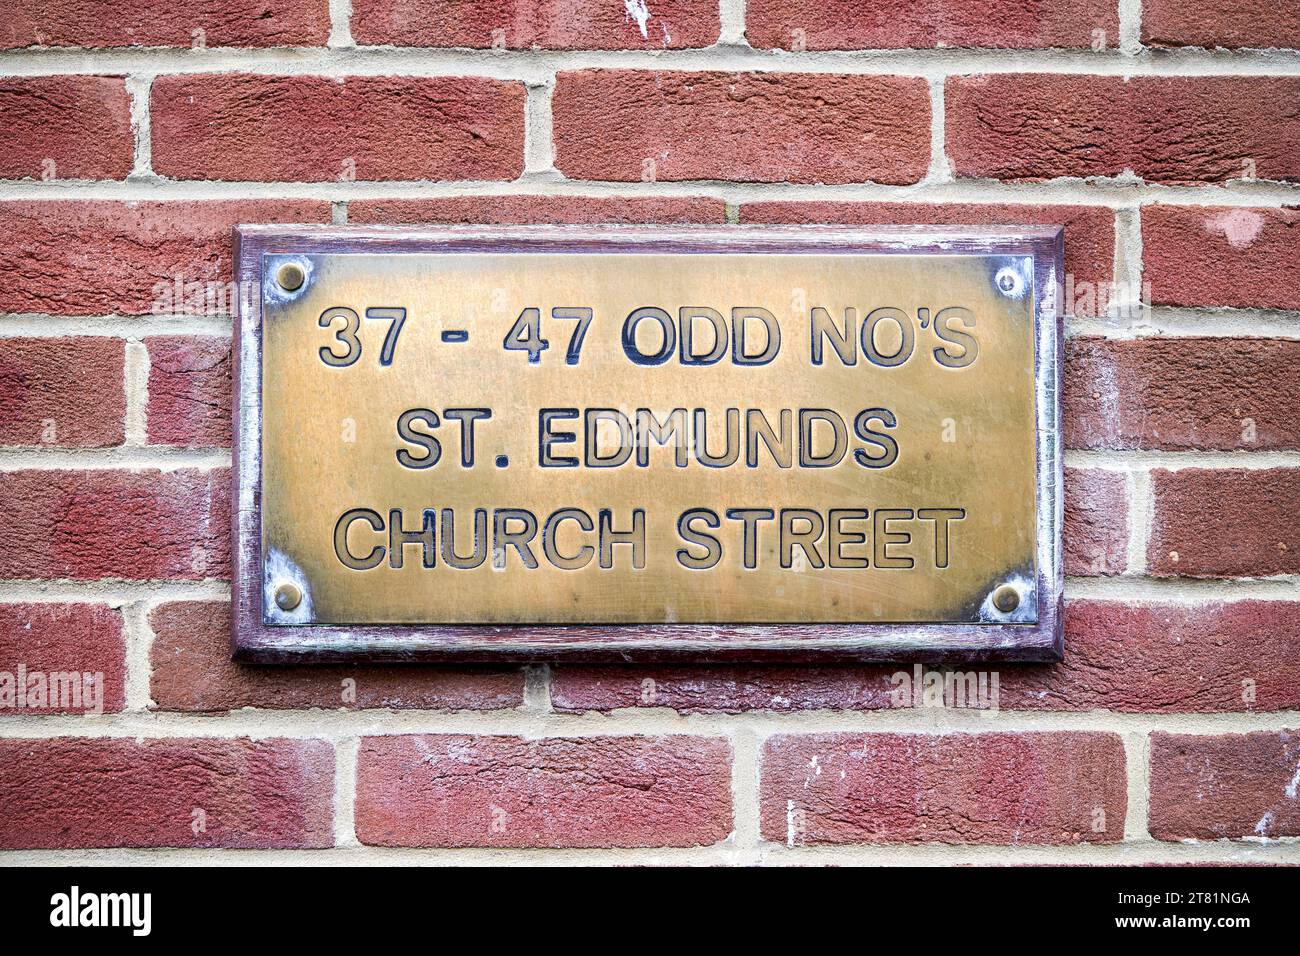 Brass plaque showing odd number addresses and street name Stock Photo